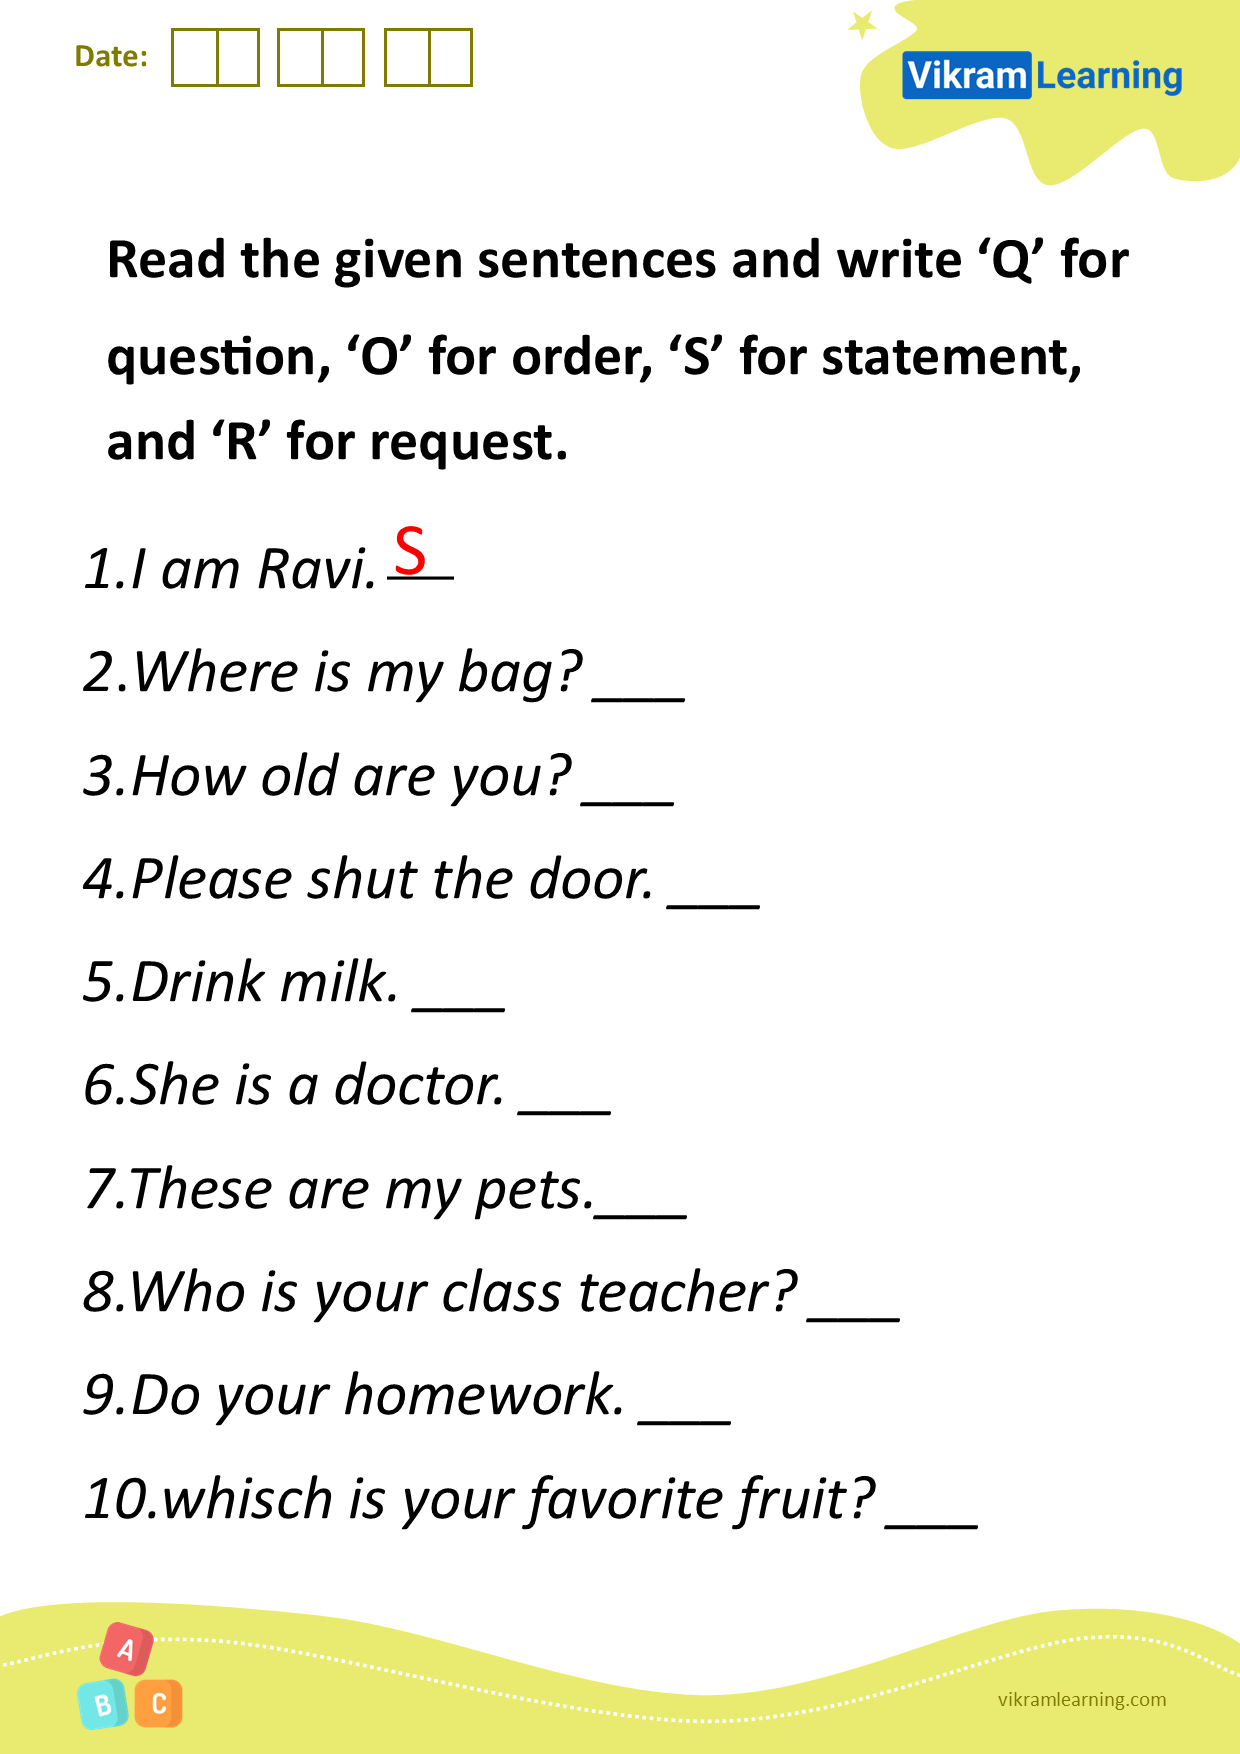 download-read-the-given-sentences-and-write-q-for-the-question-o-for-order-s-for